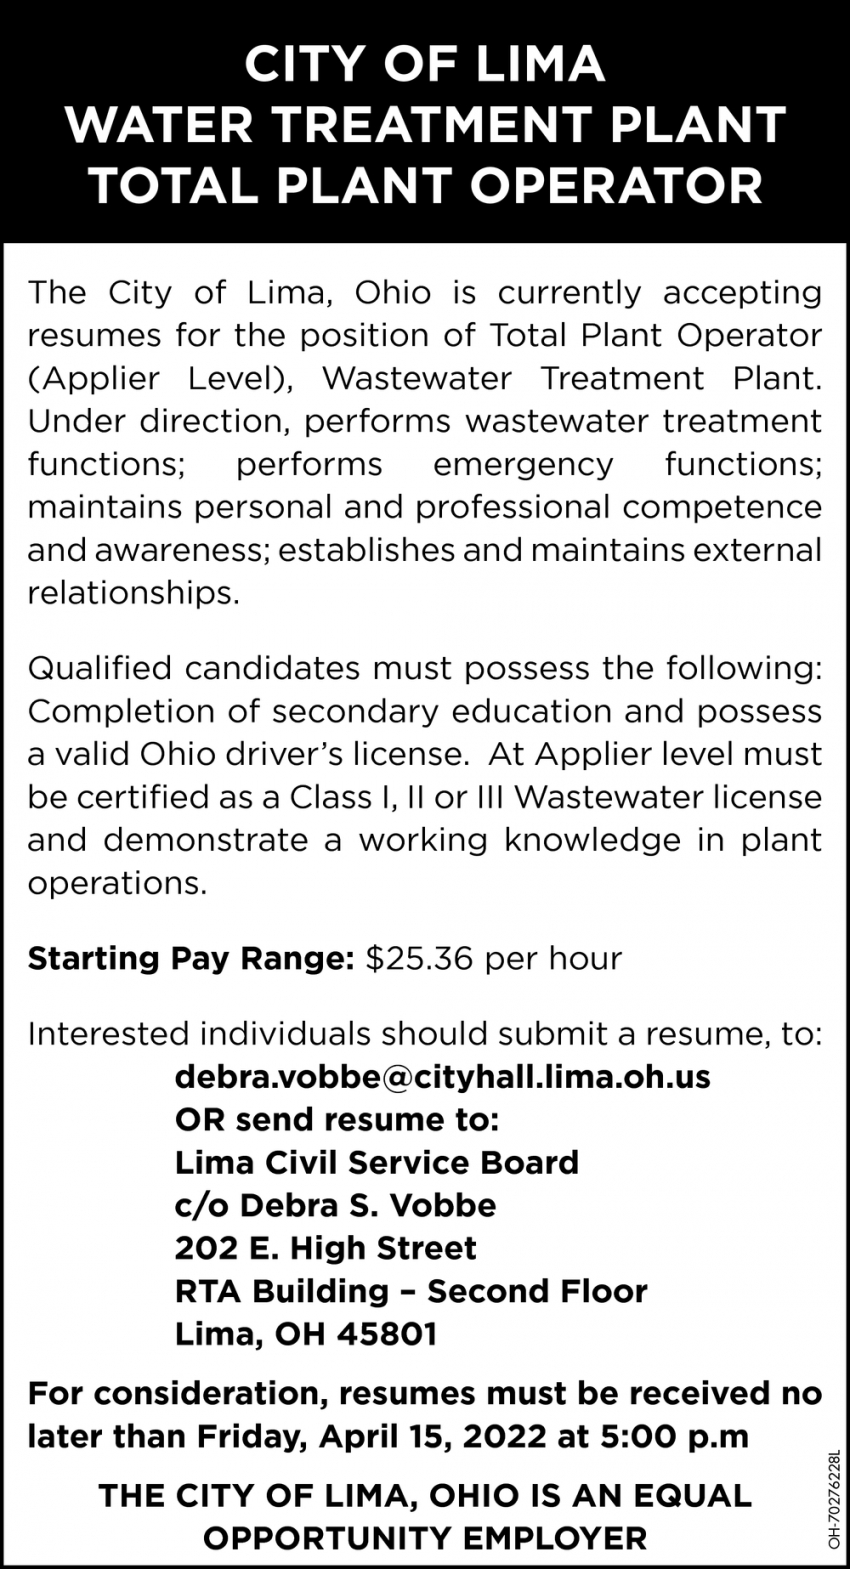 Water Treatment Plant Total Plant Operator